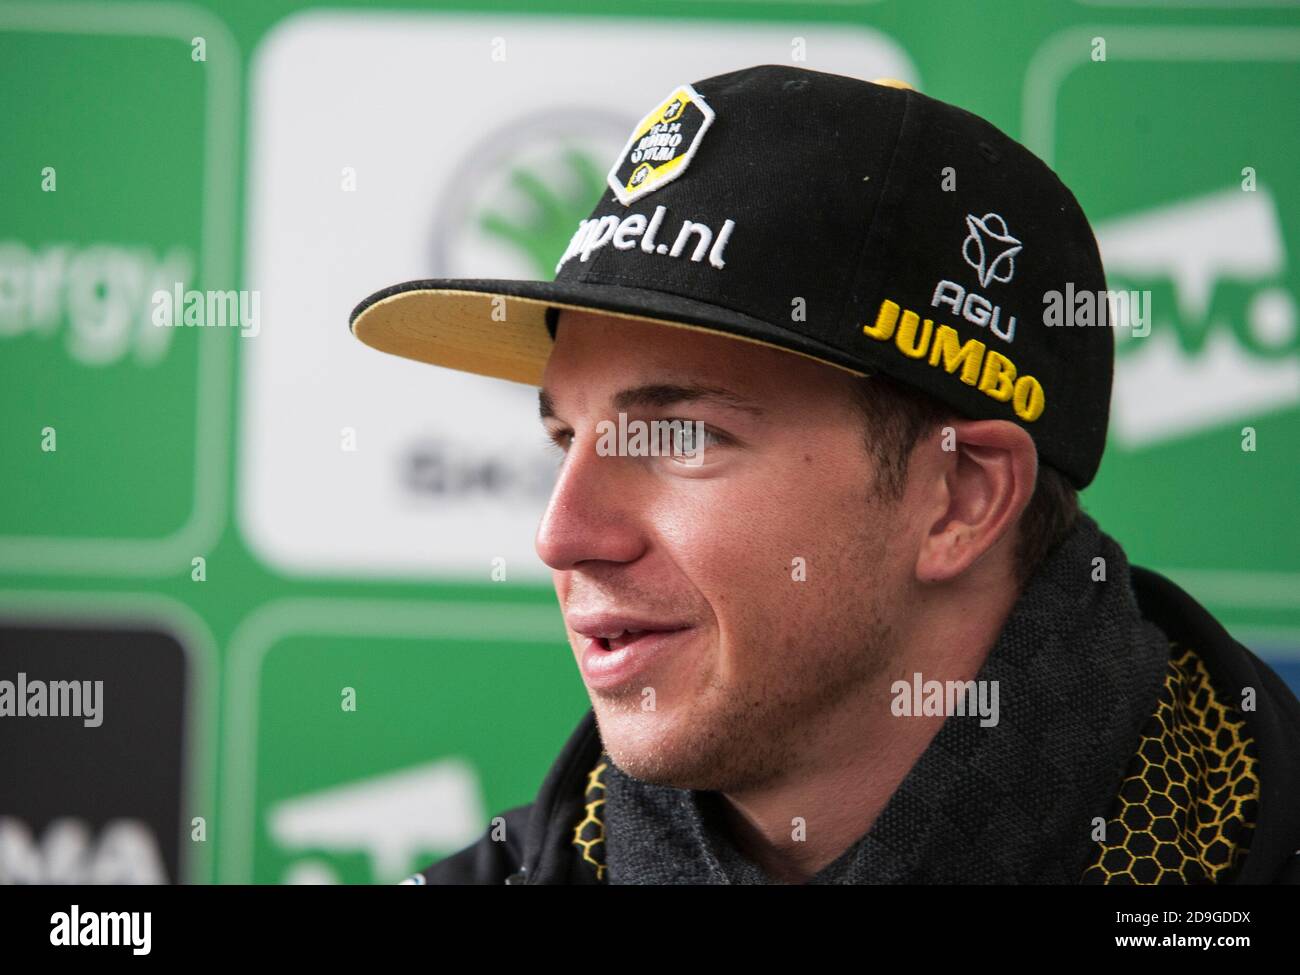 Dylan Groenewegen in the press conference after winning Stage 5 of the Tour of Britain 2019 in Birkenhead. Riders were taking part in the Wirral Stage (Stage 5) of the 2019 Tour of Britain. The overall General Classification was won by Mathieu van der Poel. Stock Photo